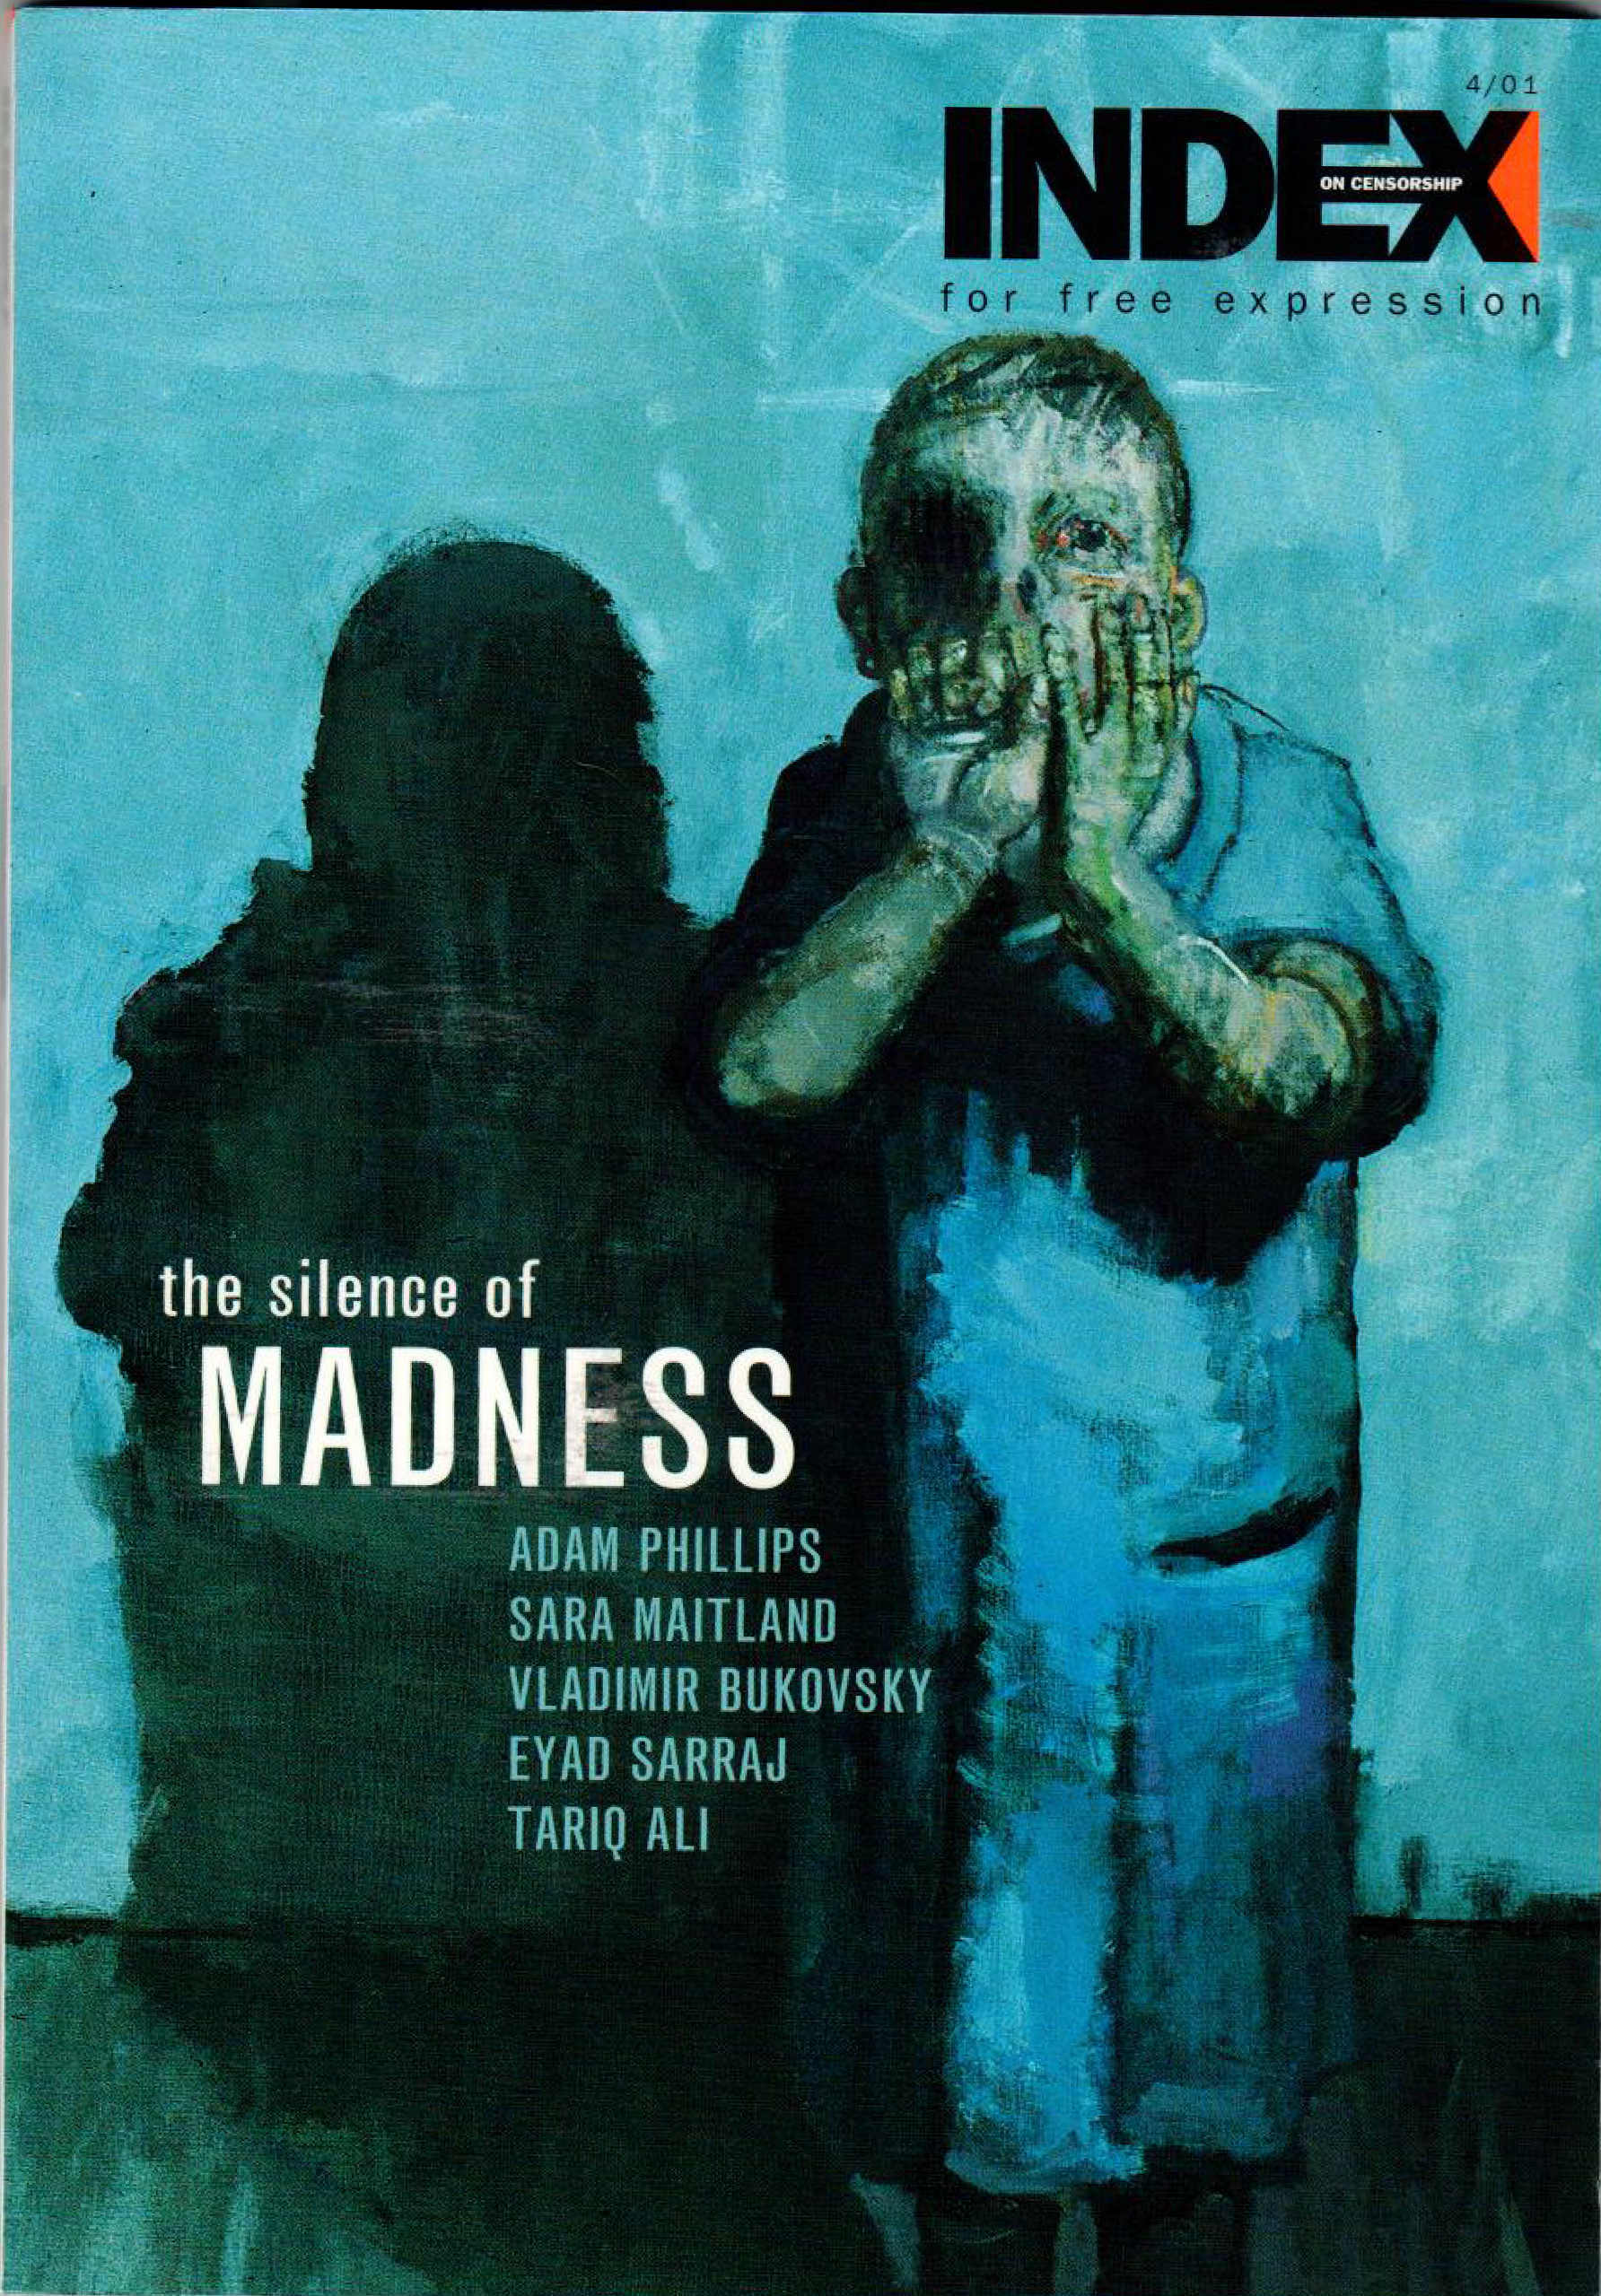 The silence of madness, the winter 2001 issue of Index on Censorship magazine.